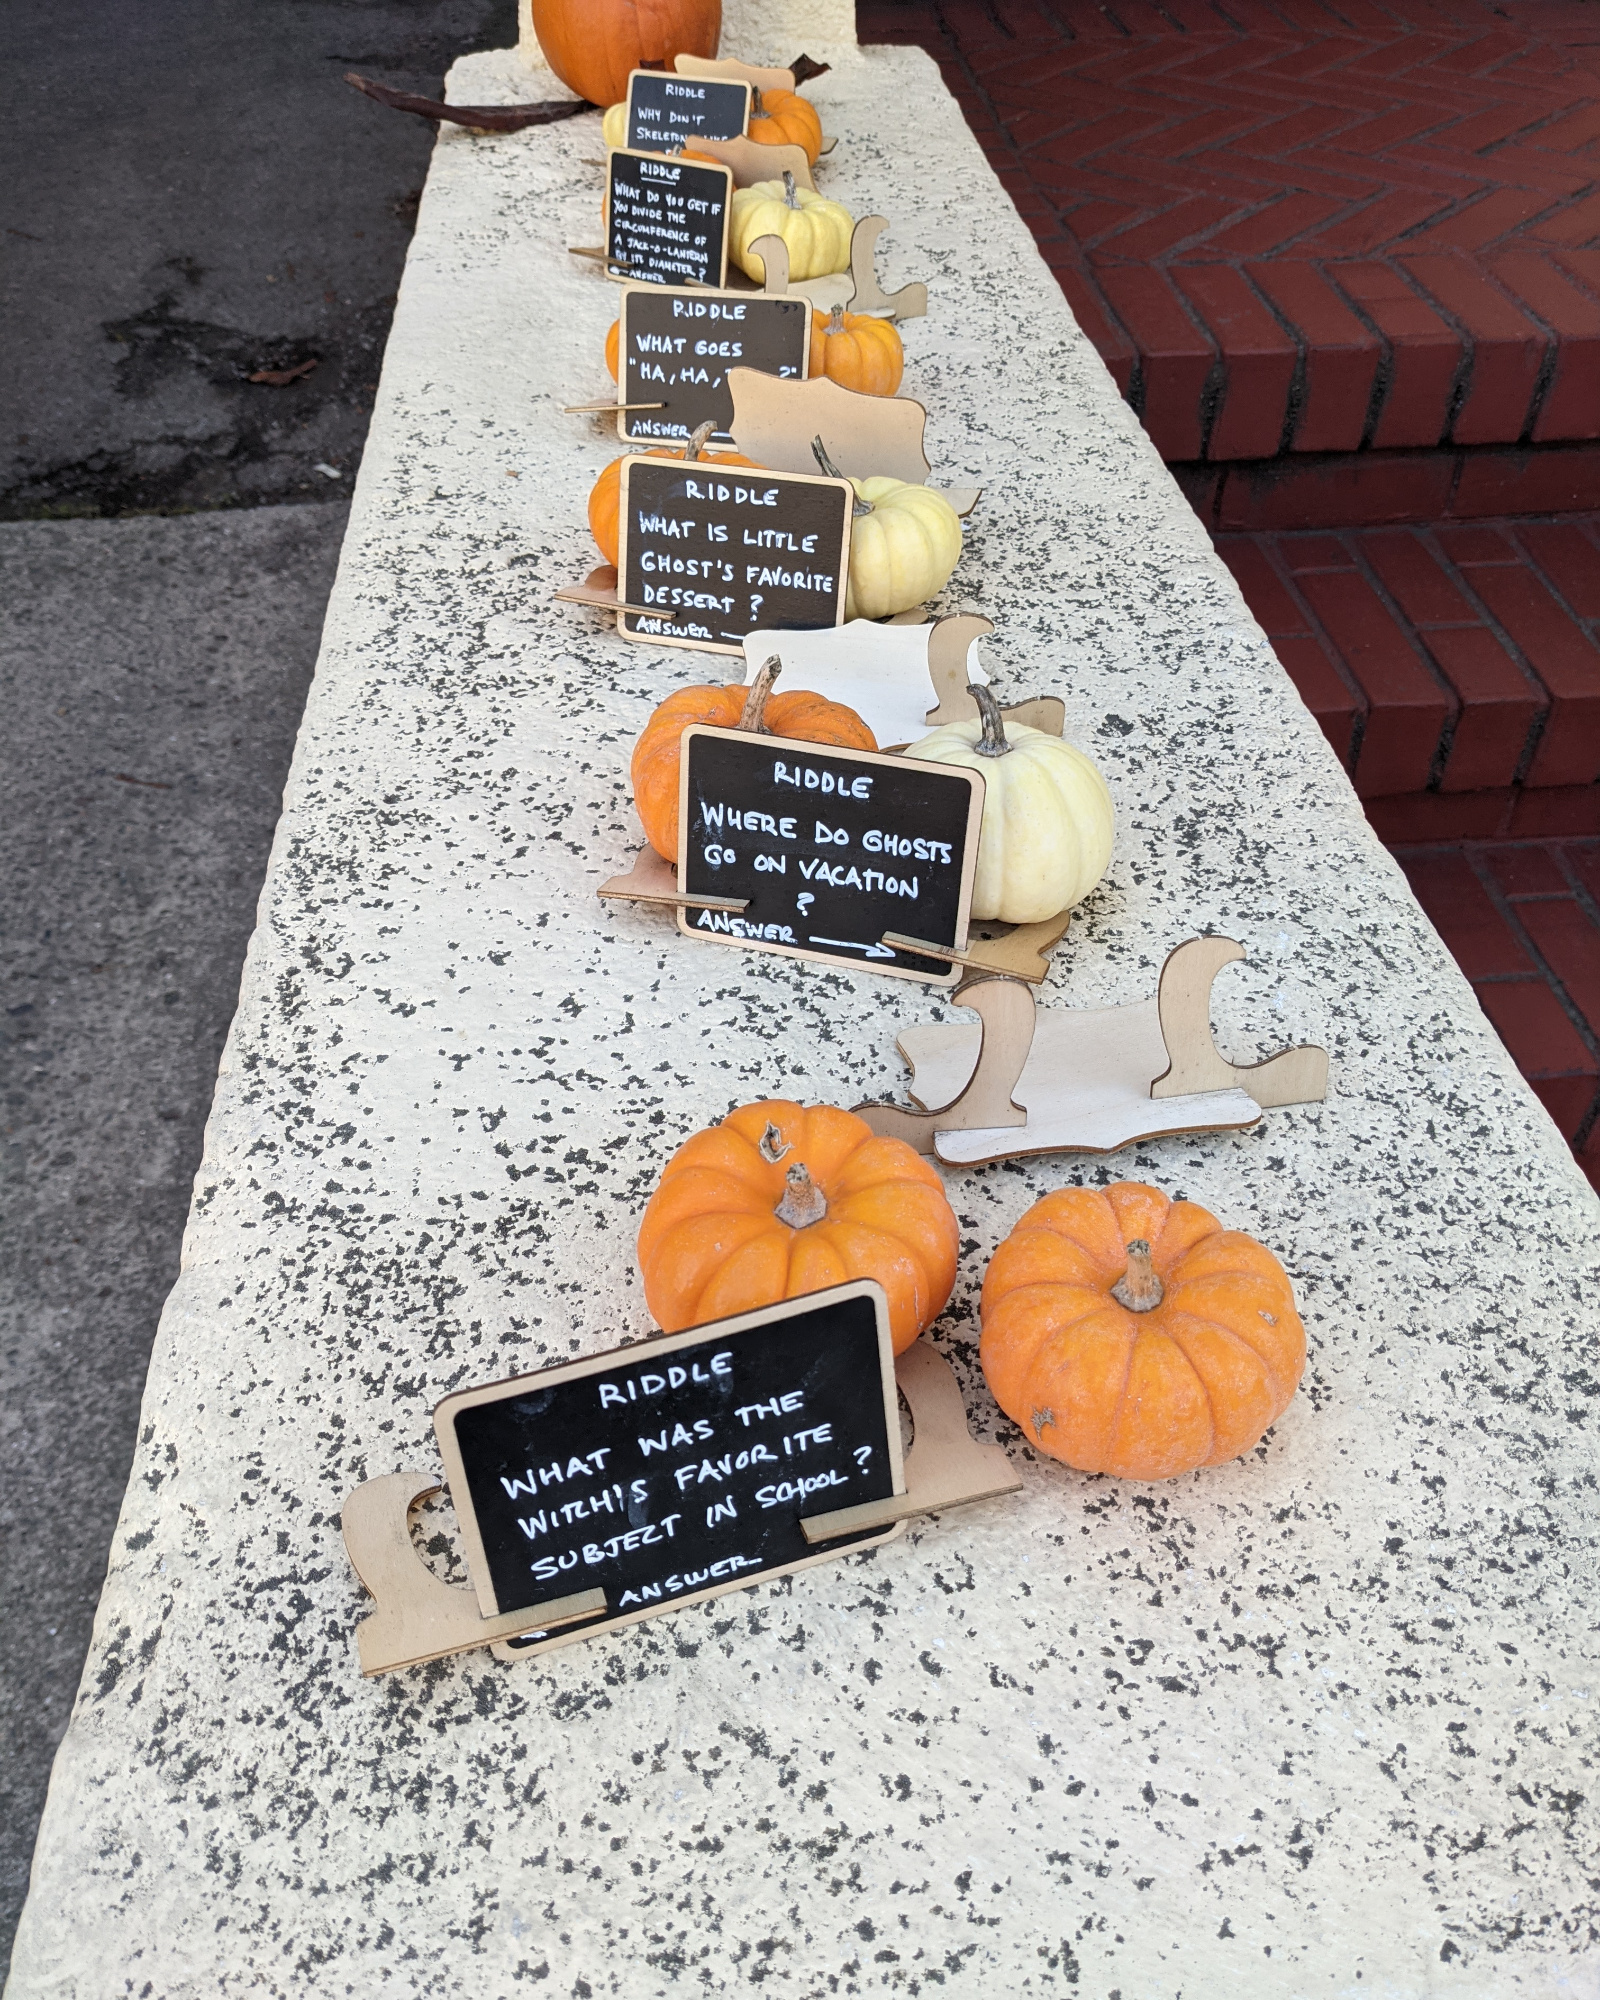 Decorative gourds with little riddle signs